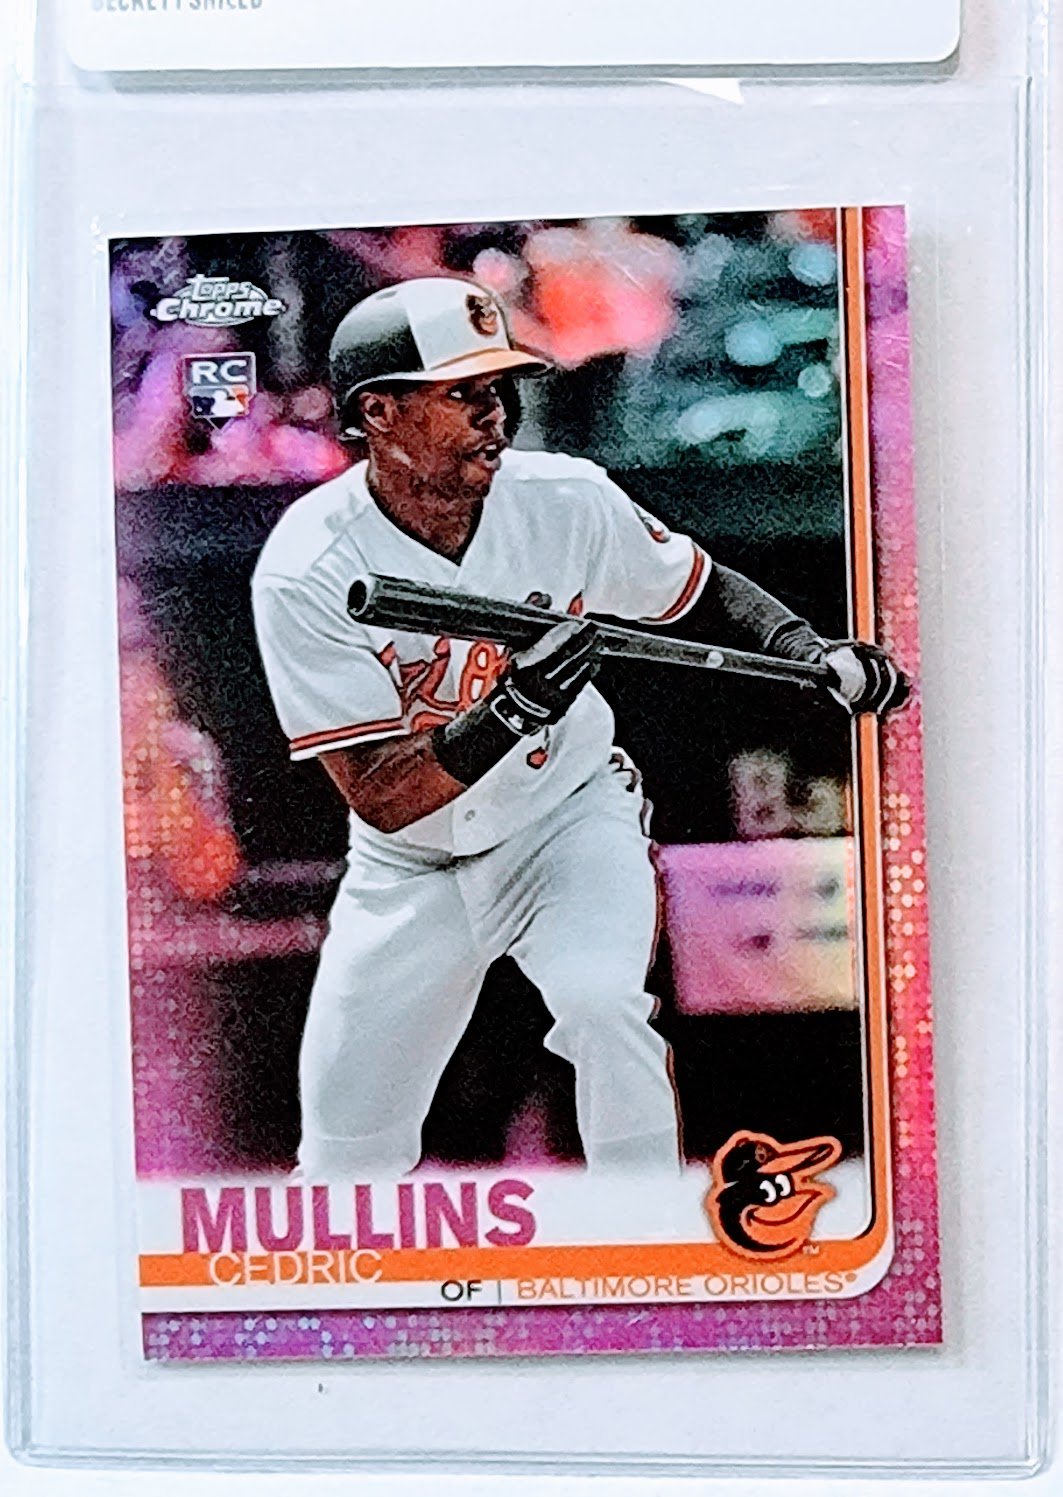 2019 Topps Chrome Cedric Mullins Pink Rookie Refractor Baseball Trading Card TPTV simple Xclusive Collectibles   